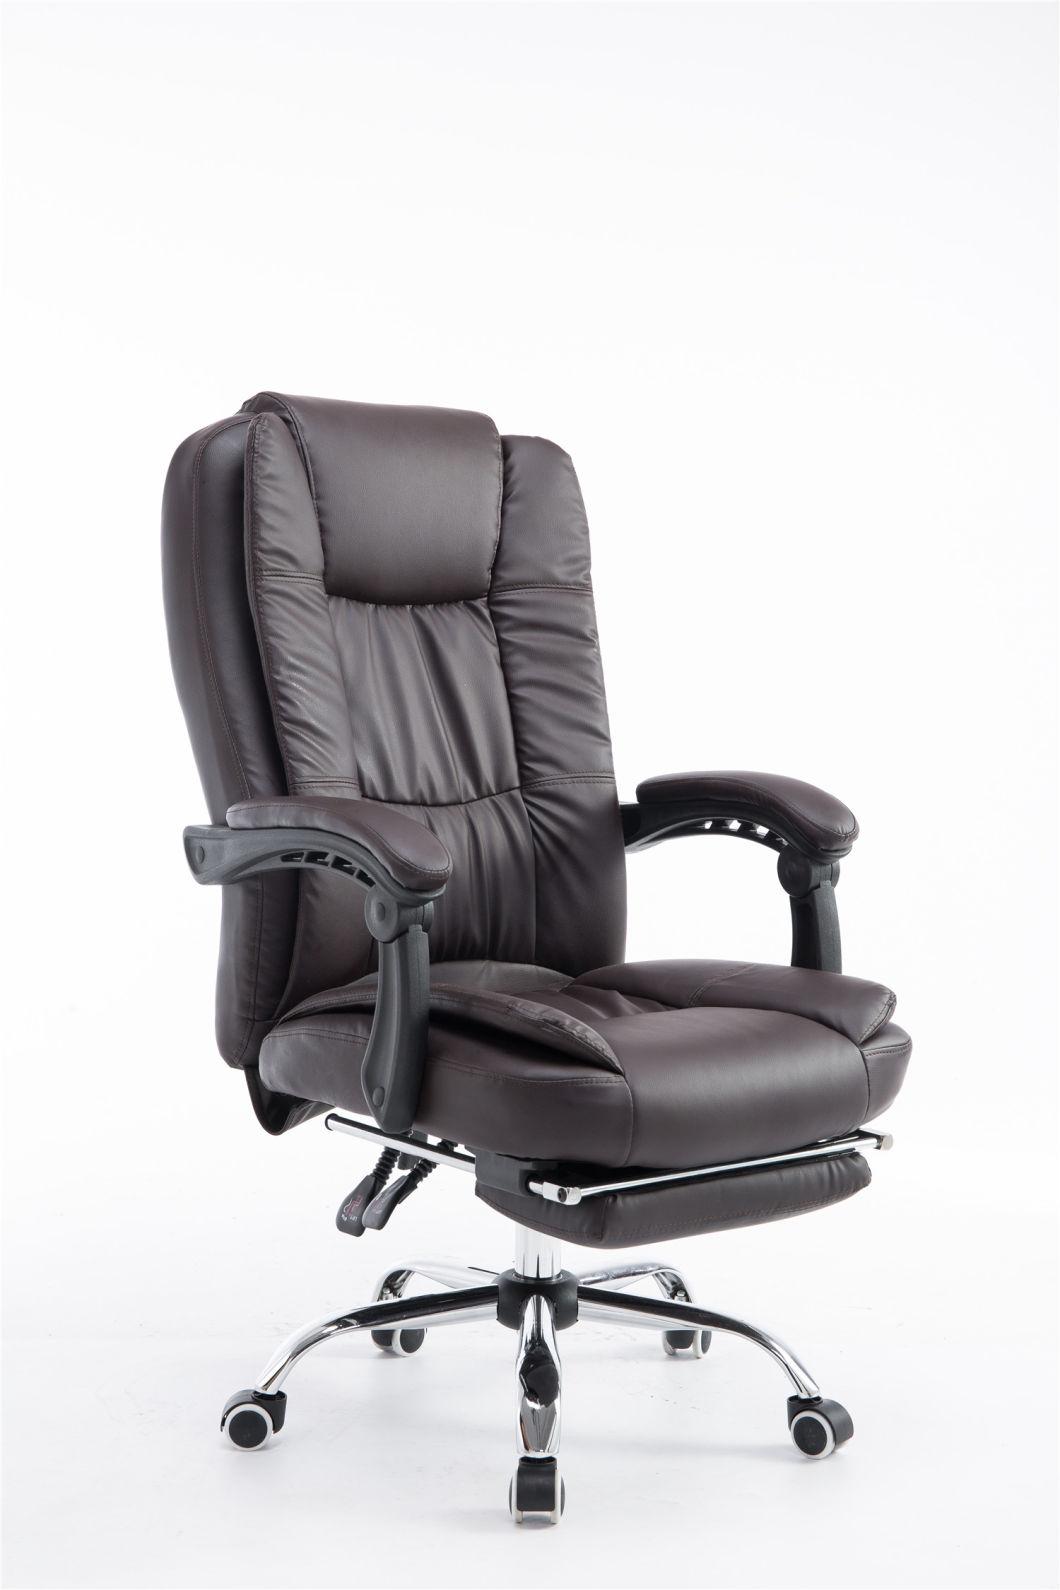 European American Market Popular PU Leather Office Chair High Back Swivel Executive for Office and Home Use Manager Innovative Design Furniture